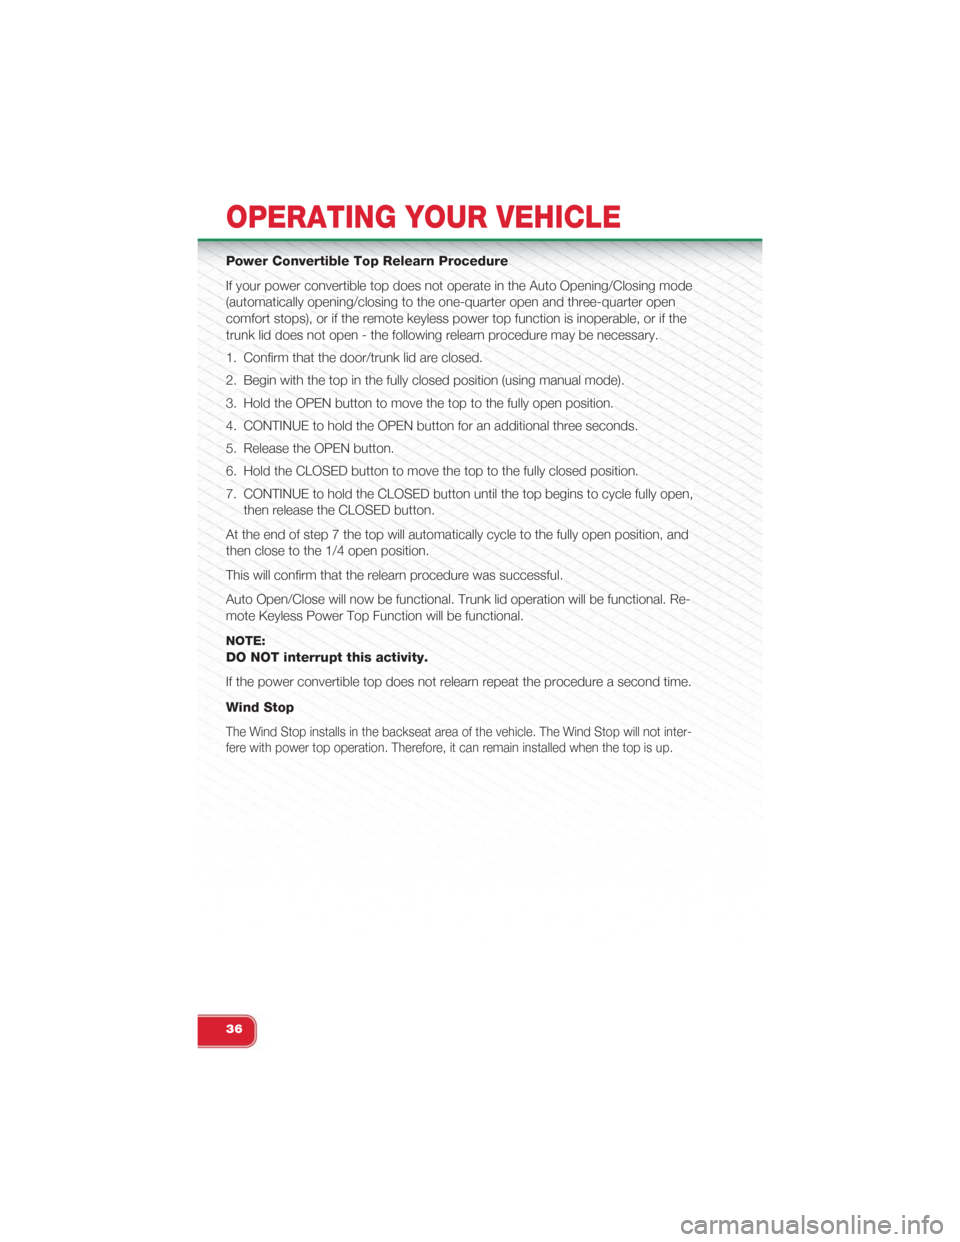 FIAT 500 ABARTH 2015 2.G Owners Guide Power Convertible Top Relearn Procedure
If your power convertible top does not operate in the Auto Opening/Closing mode
(automatically opening/closing to the one-quarter open and three-quarter open
co